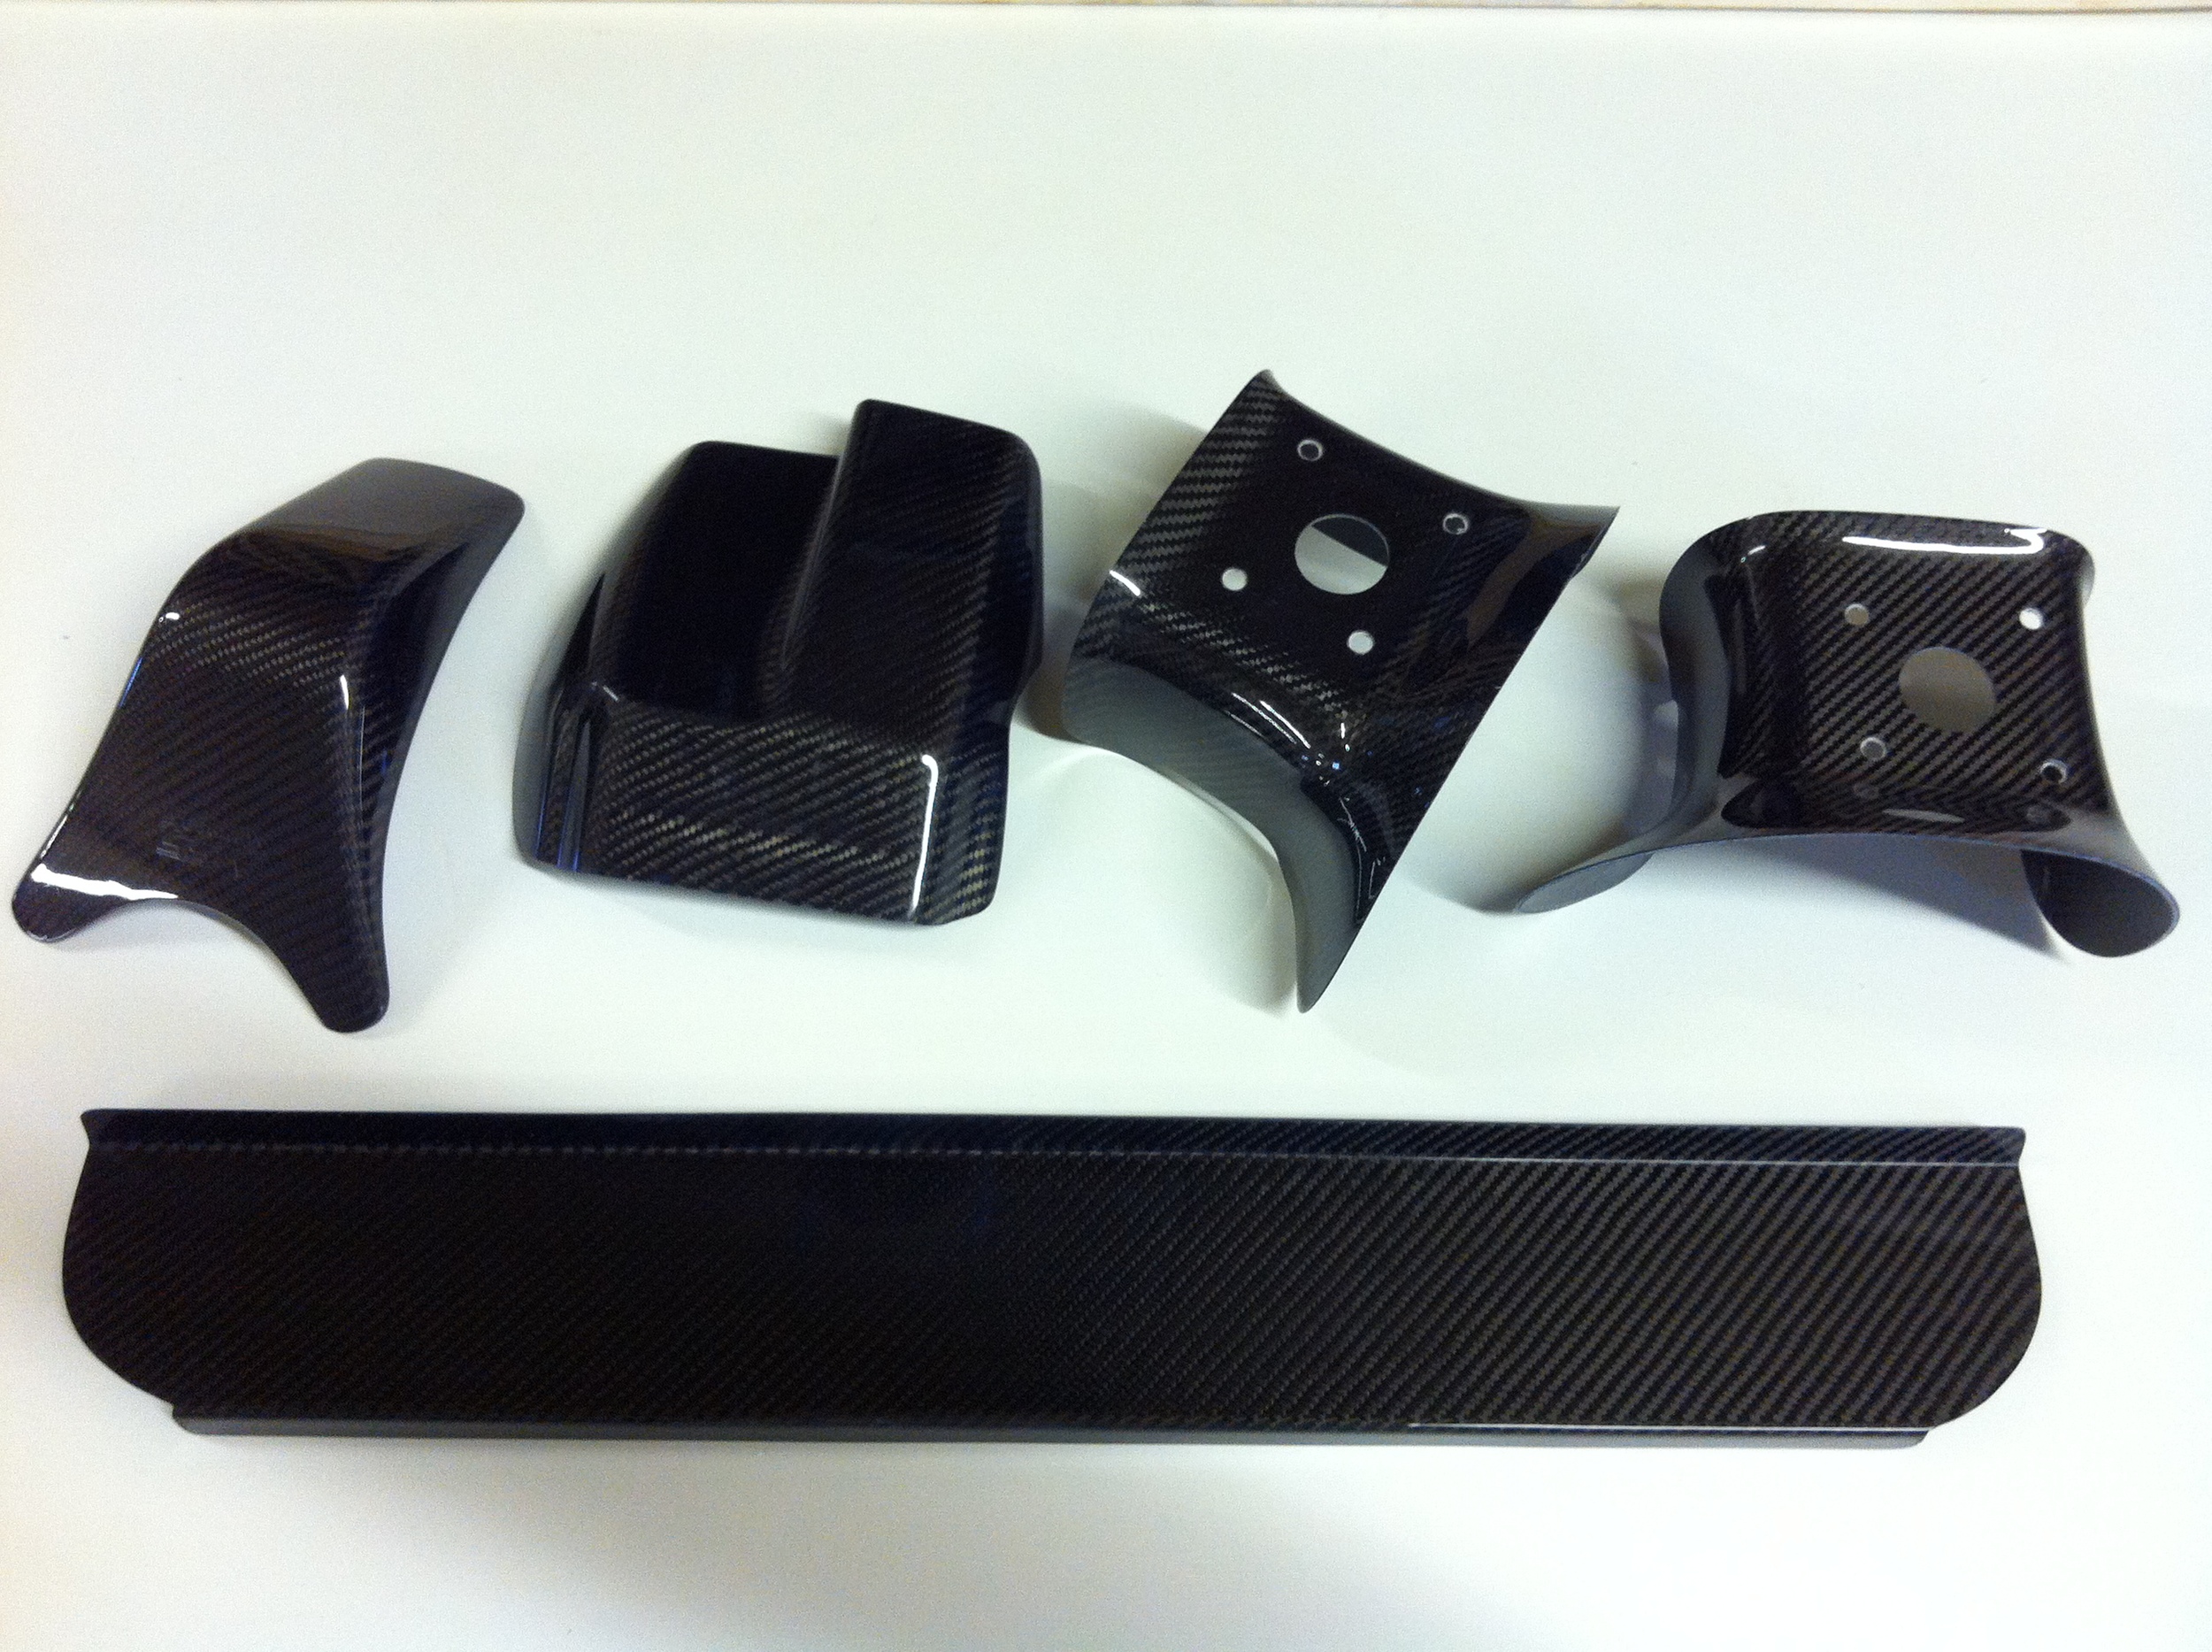  ​carbon products made by f-hot, ready for the dispatch department to package and send out. 